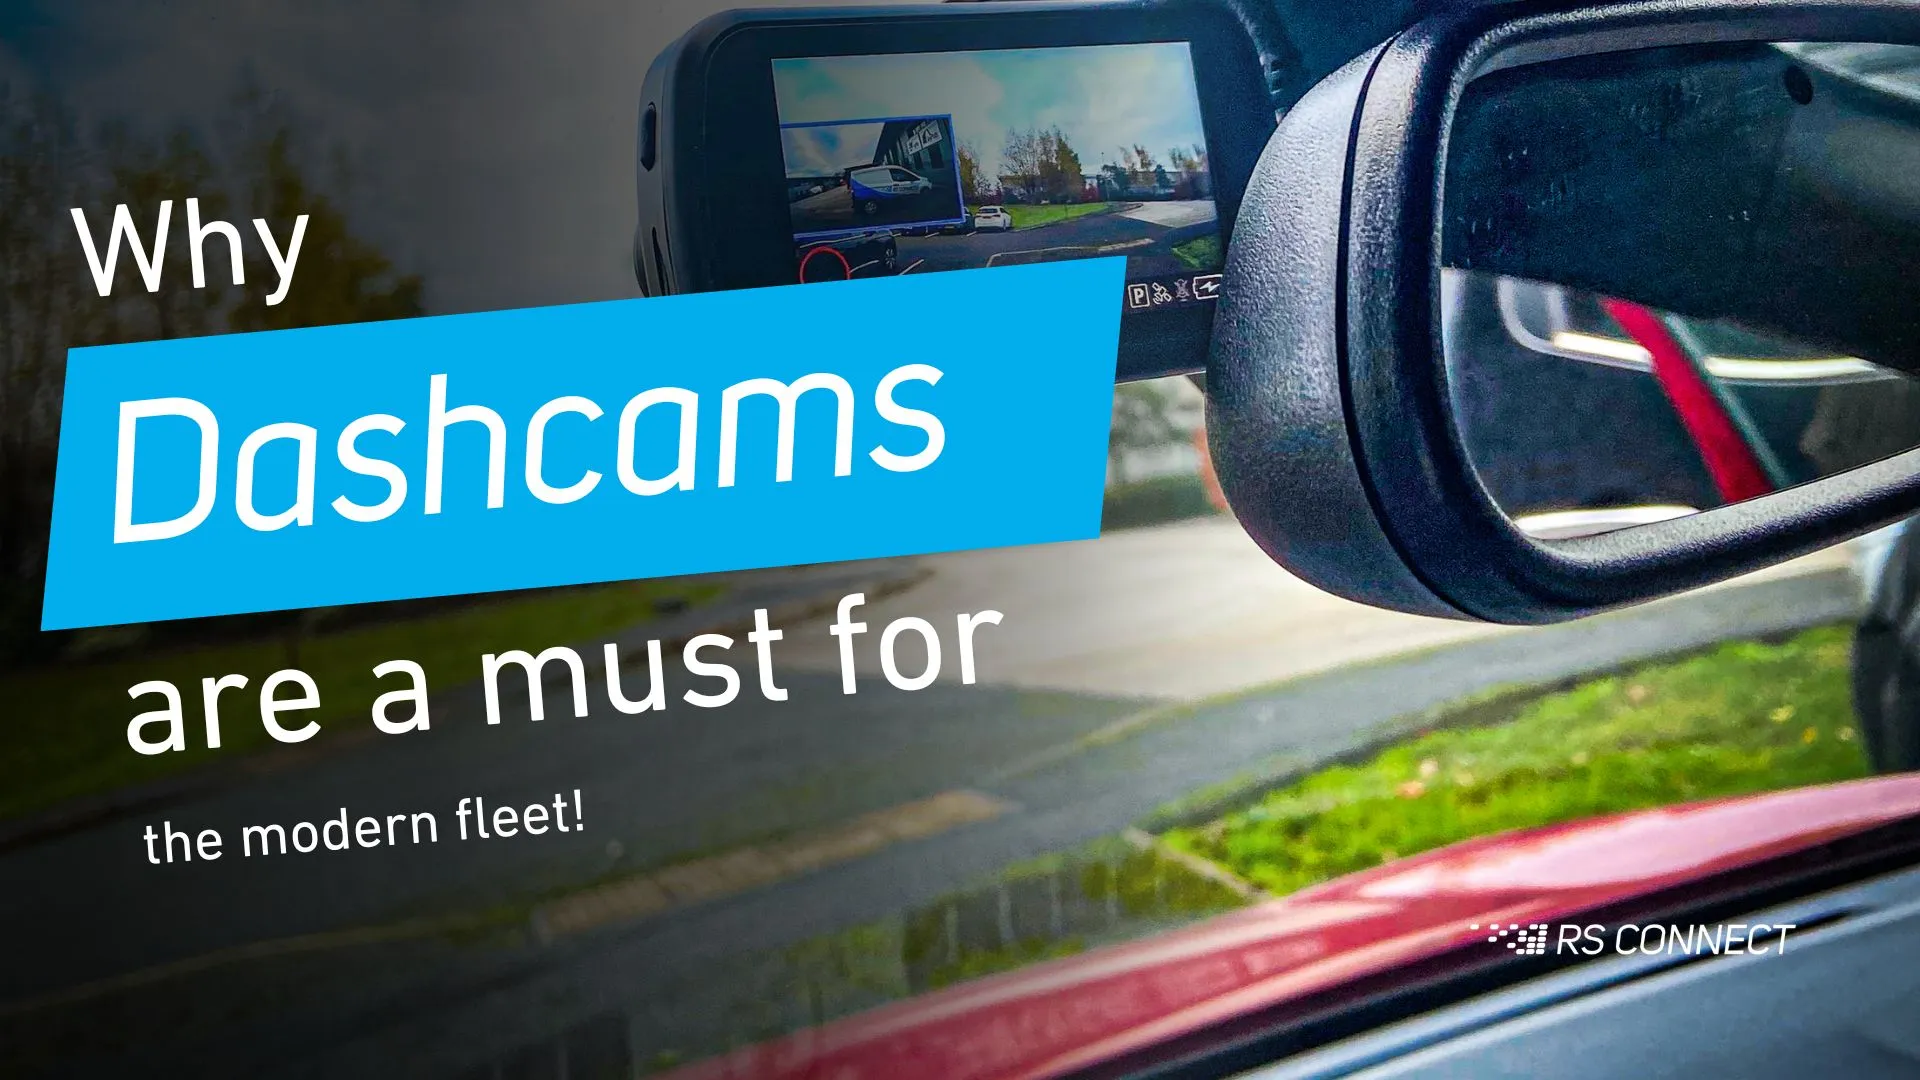 why dash cams are a must for modern fleets